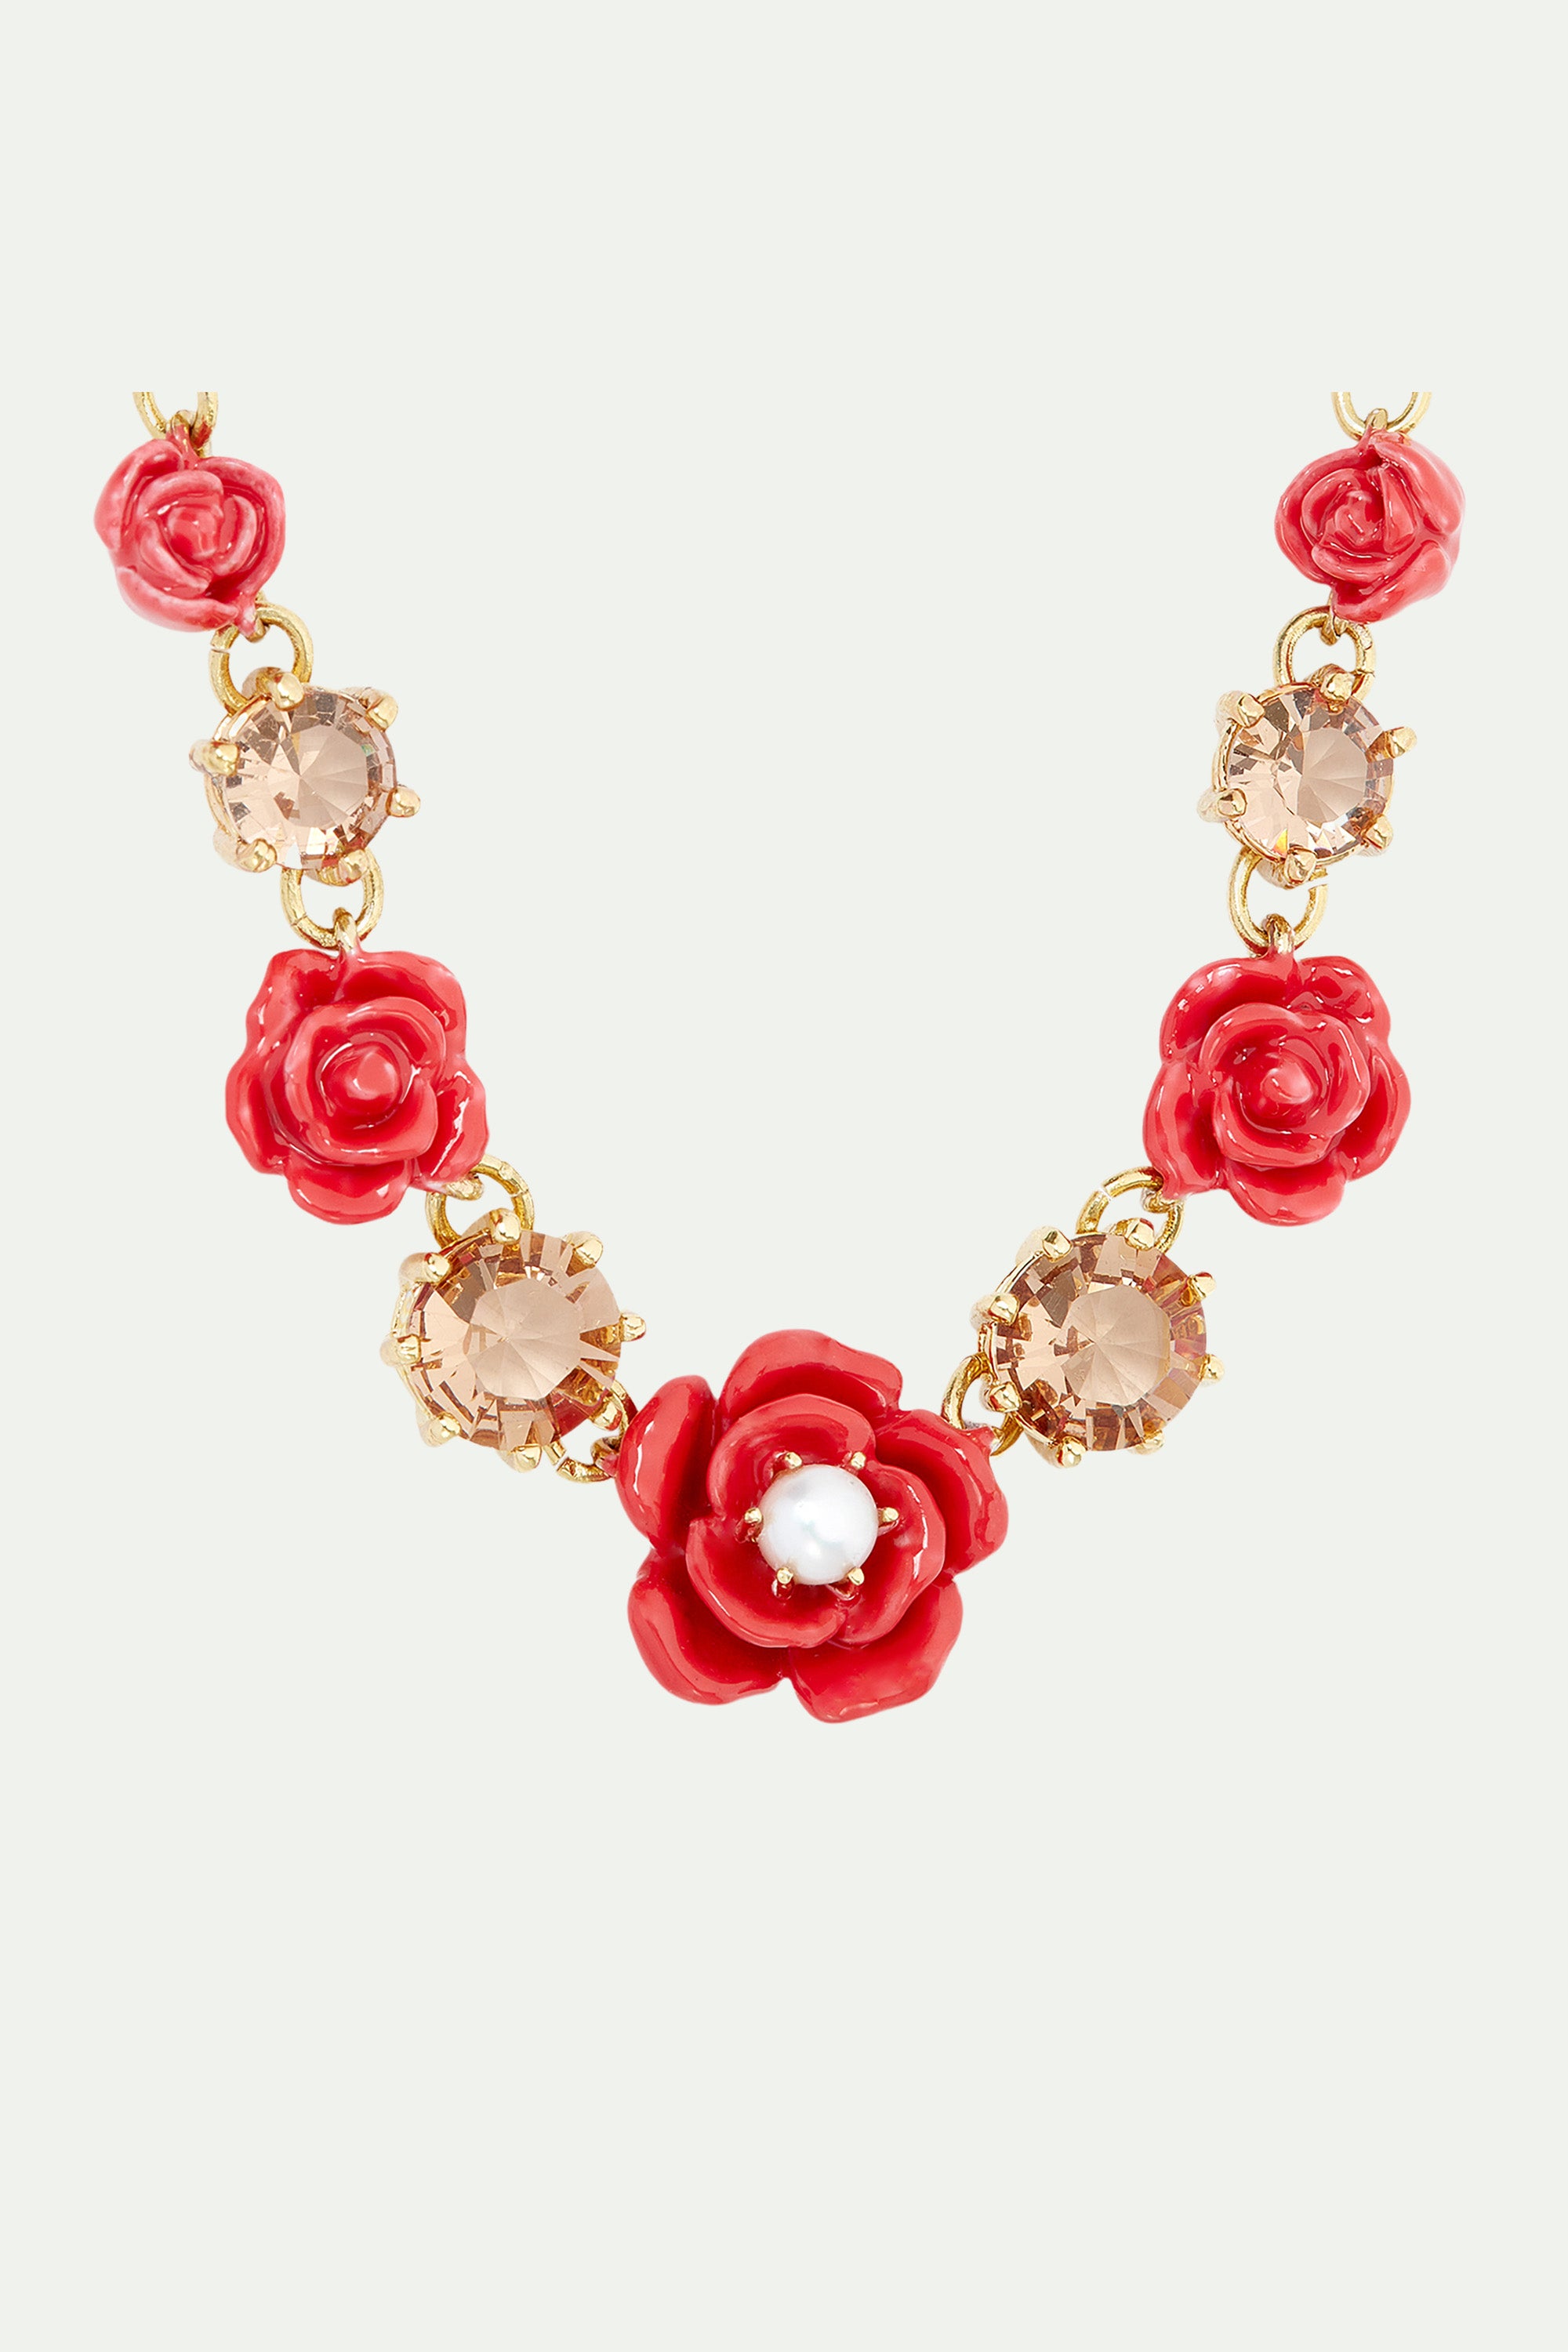 Roses, cultured pearl and stone statement necklace